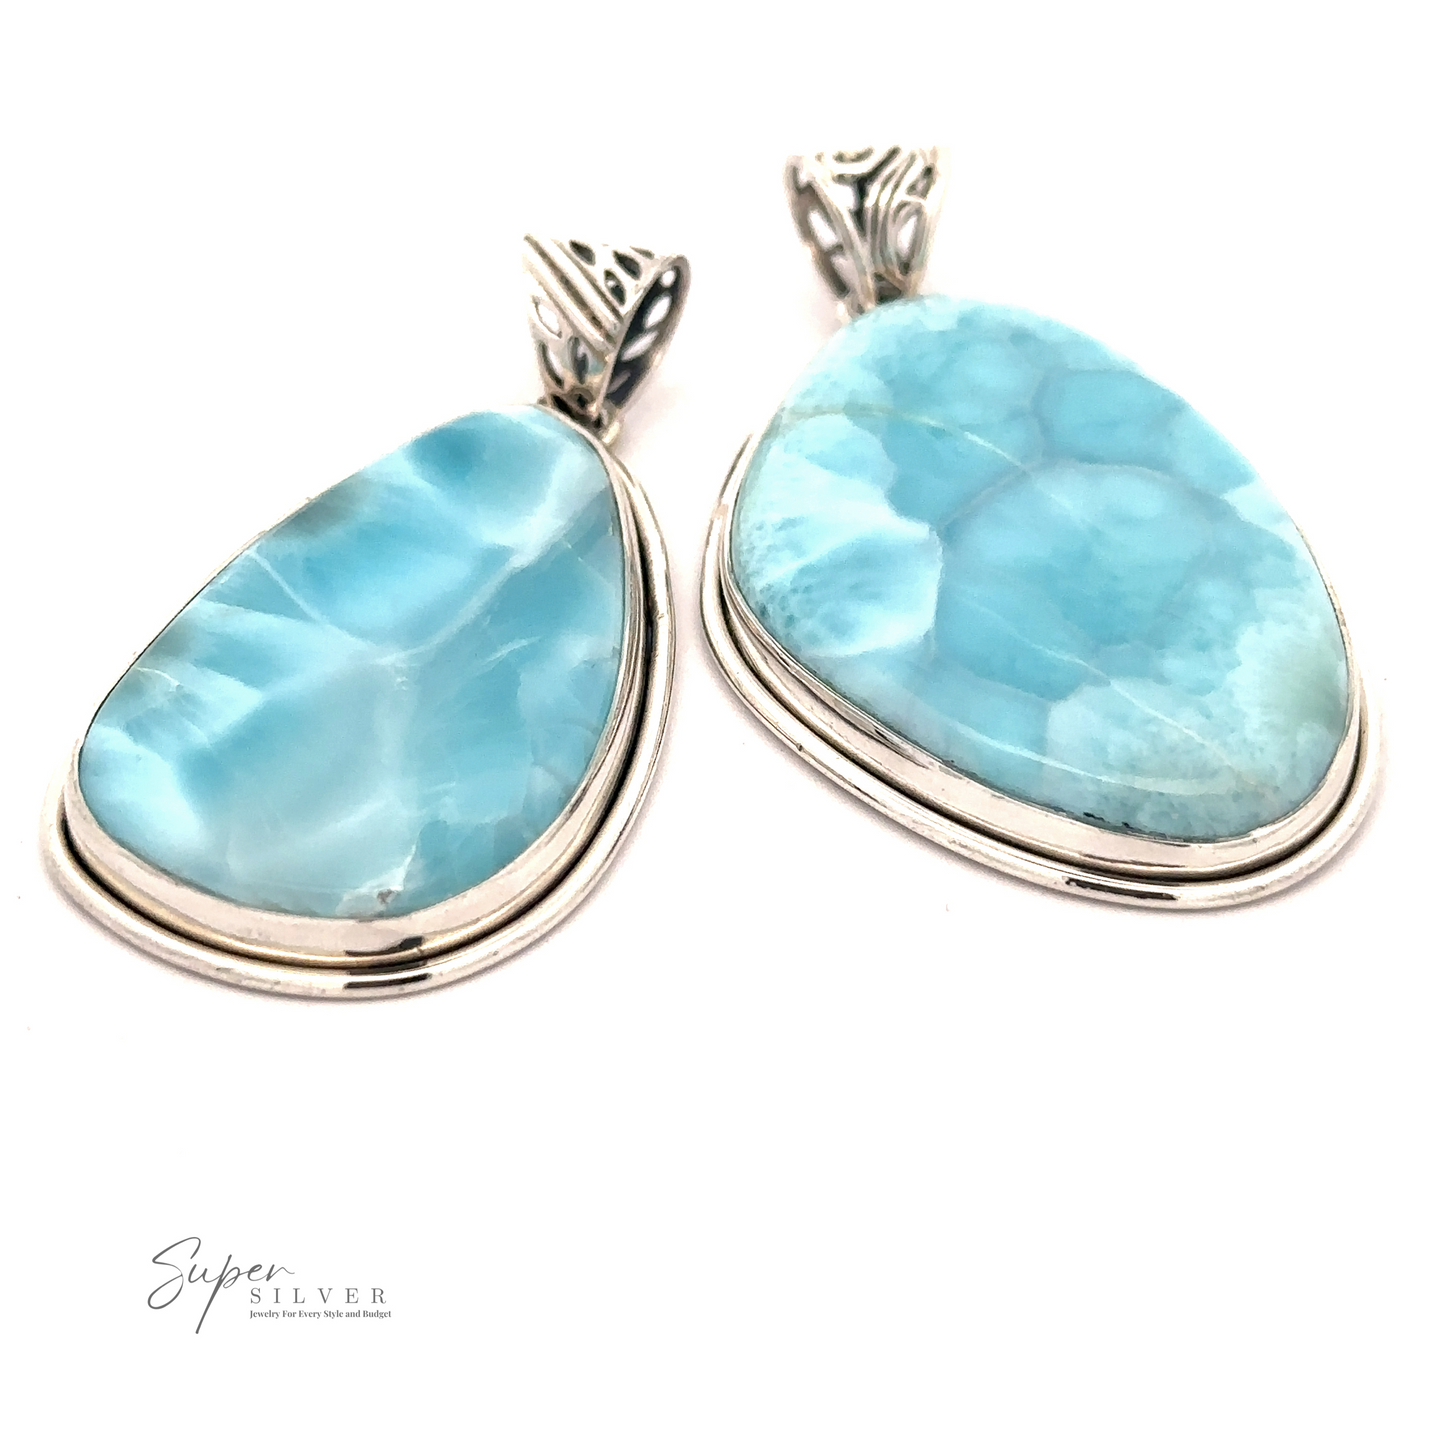 
                  
                    Two elegant Larimar Pendant with Simple Border featuring large, irregularly-shaped Larimar stones, displayed against a white background. Text in the bottom left reads "Super Silver".
                  
                